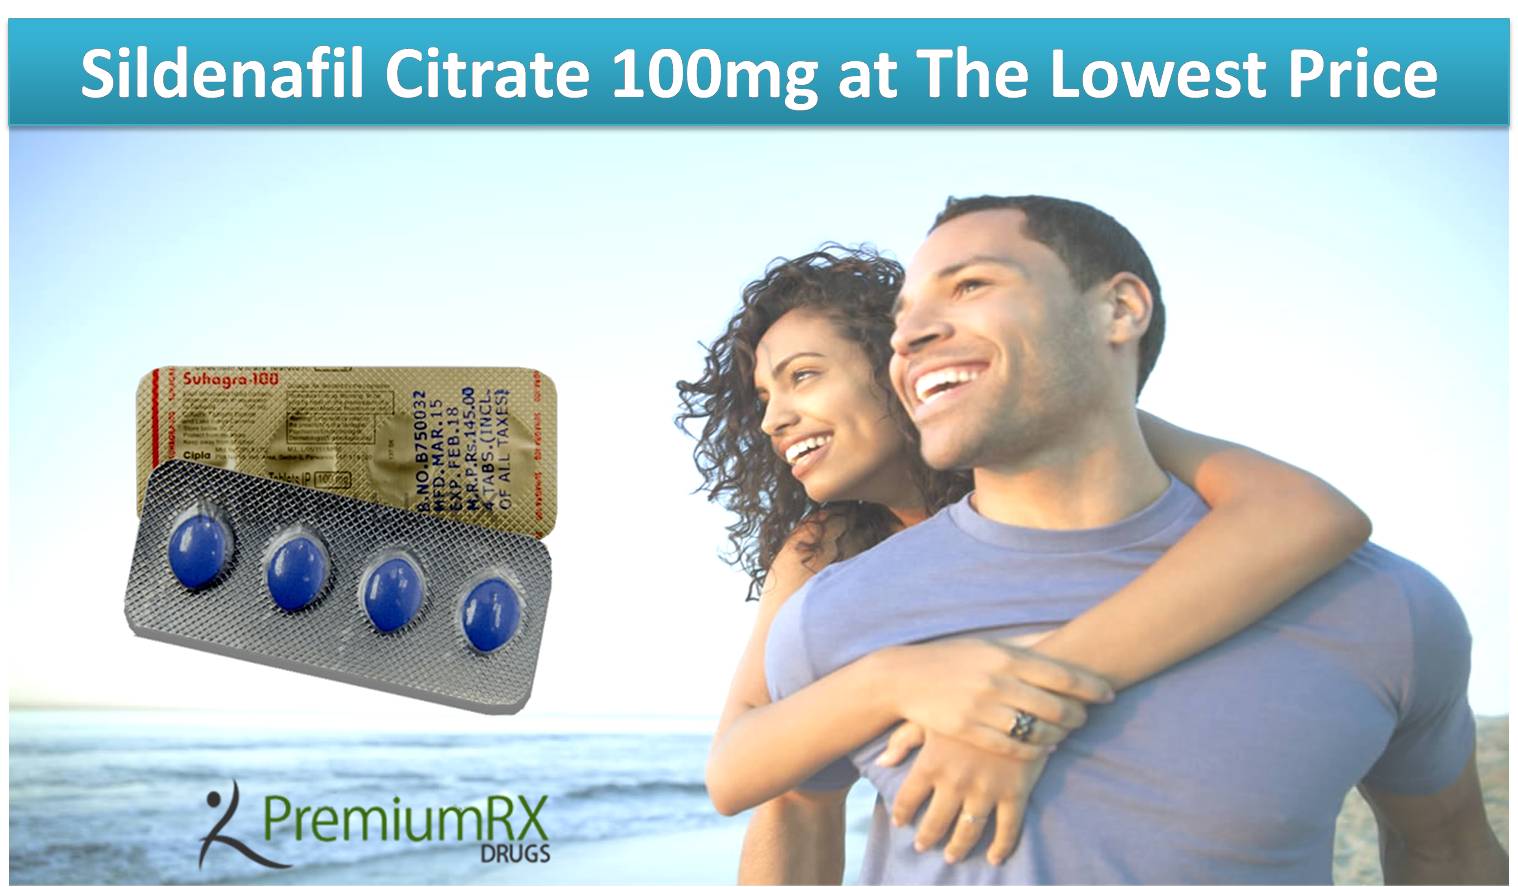 Sildenafil Citrate 100mg at The Lowest Price